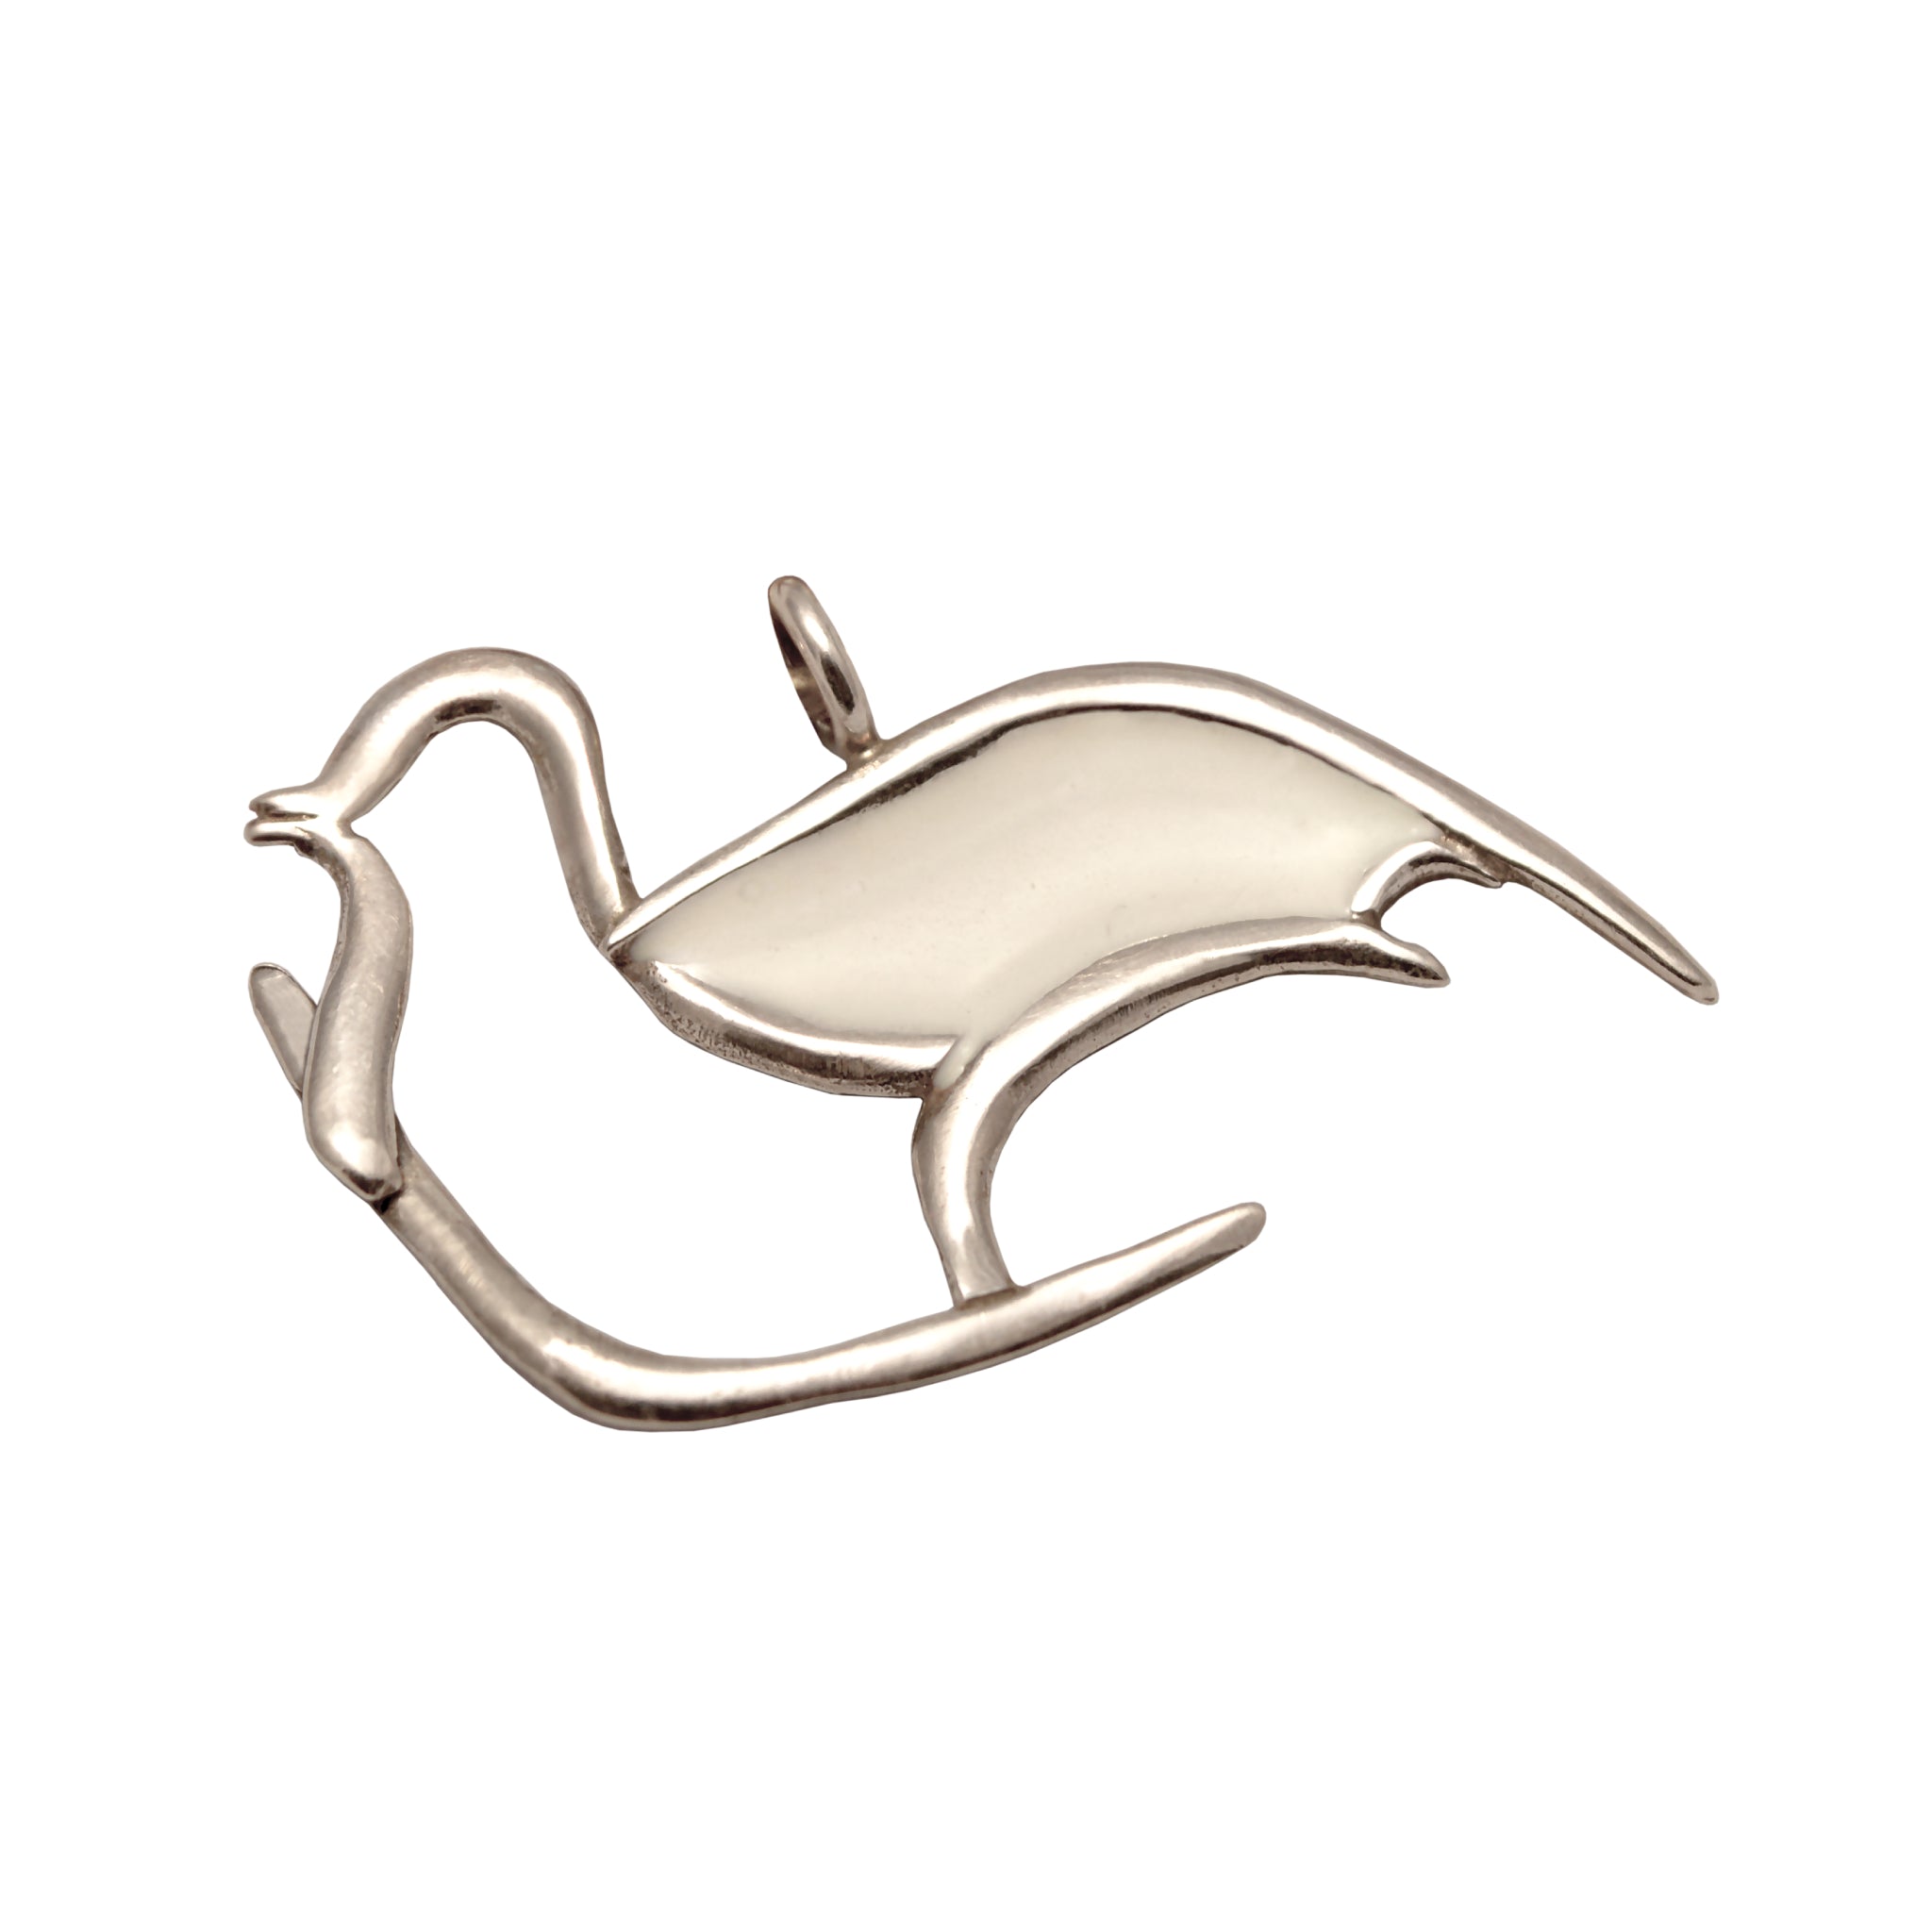 Pigeon Charm on plexiglass, silver charm with bronze leaves, home decor, gift idea, charm favor (PX-06)